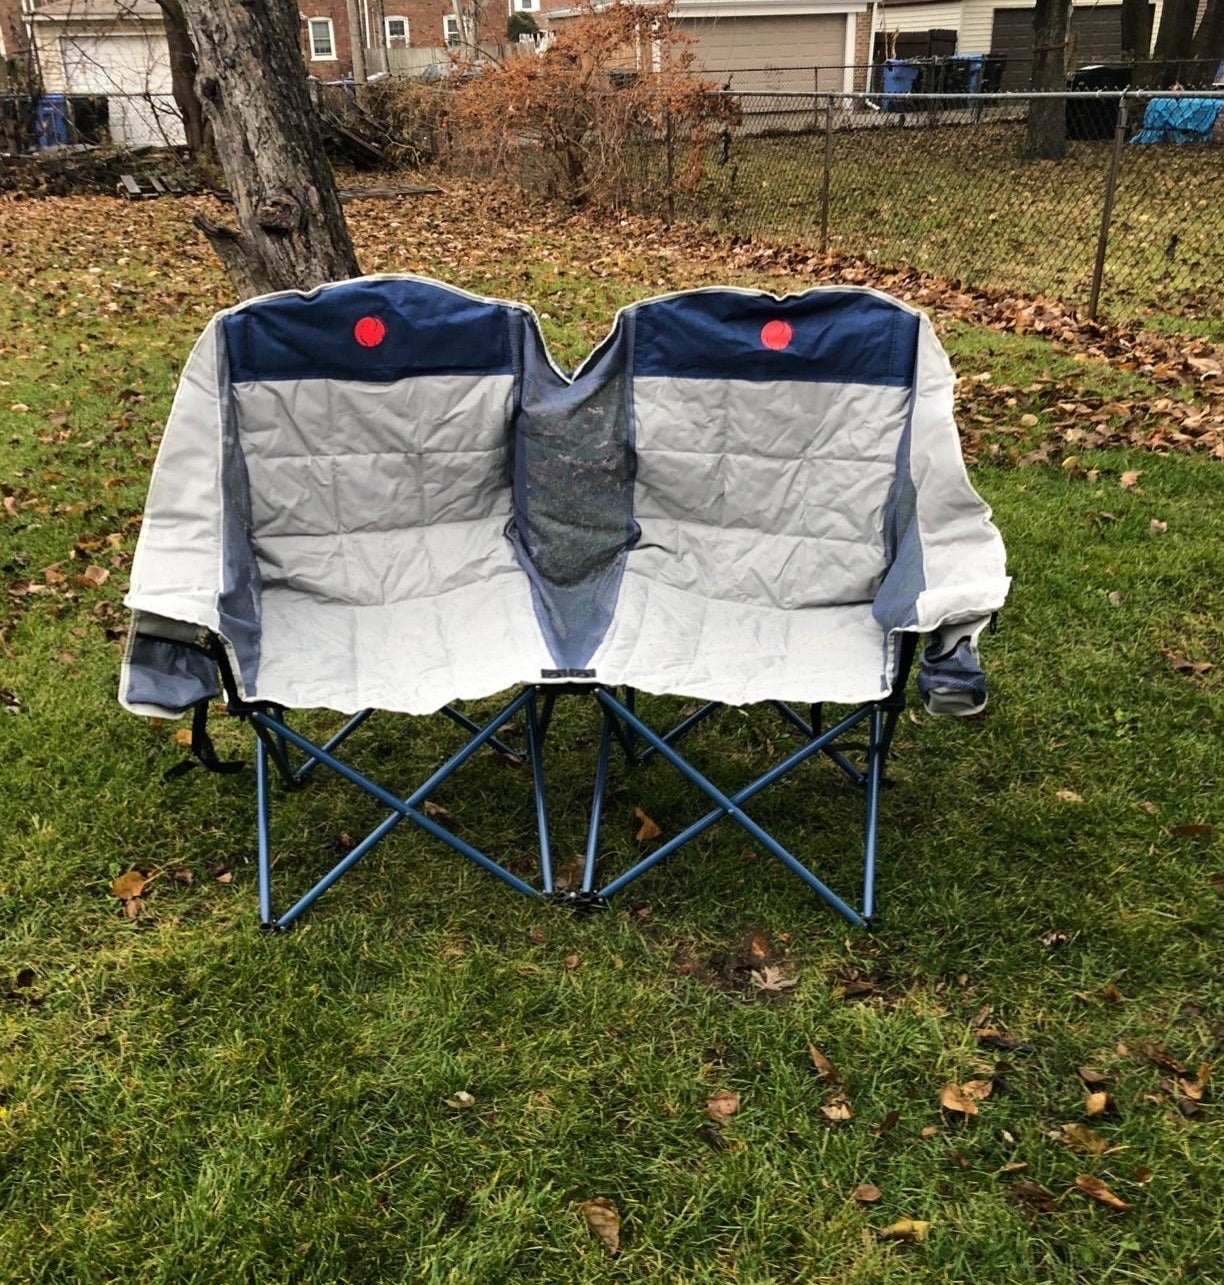 camping chair that looks like two camping chairs melded together with no middle arm rests